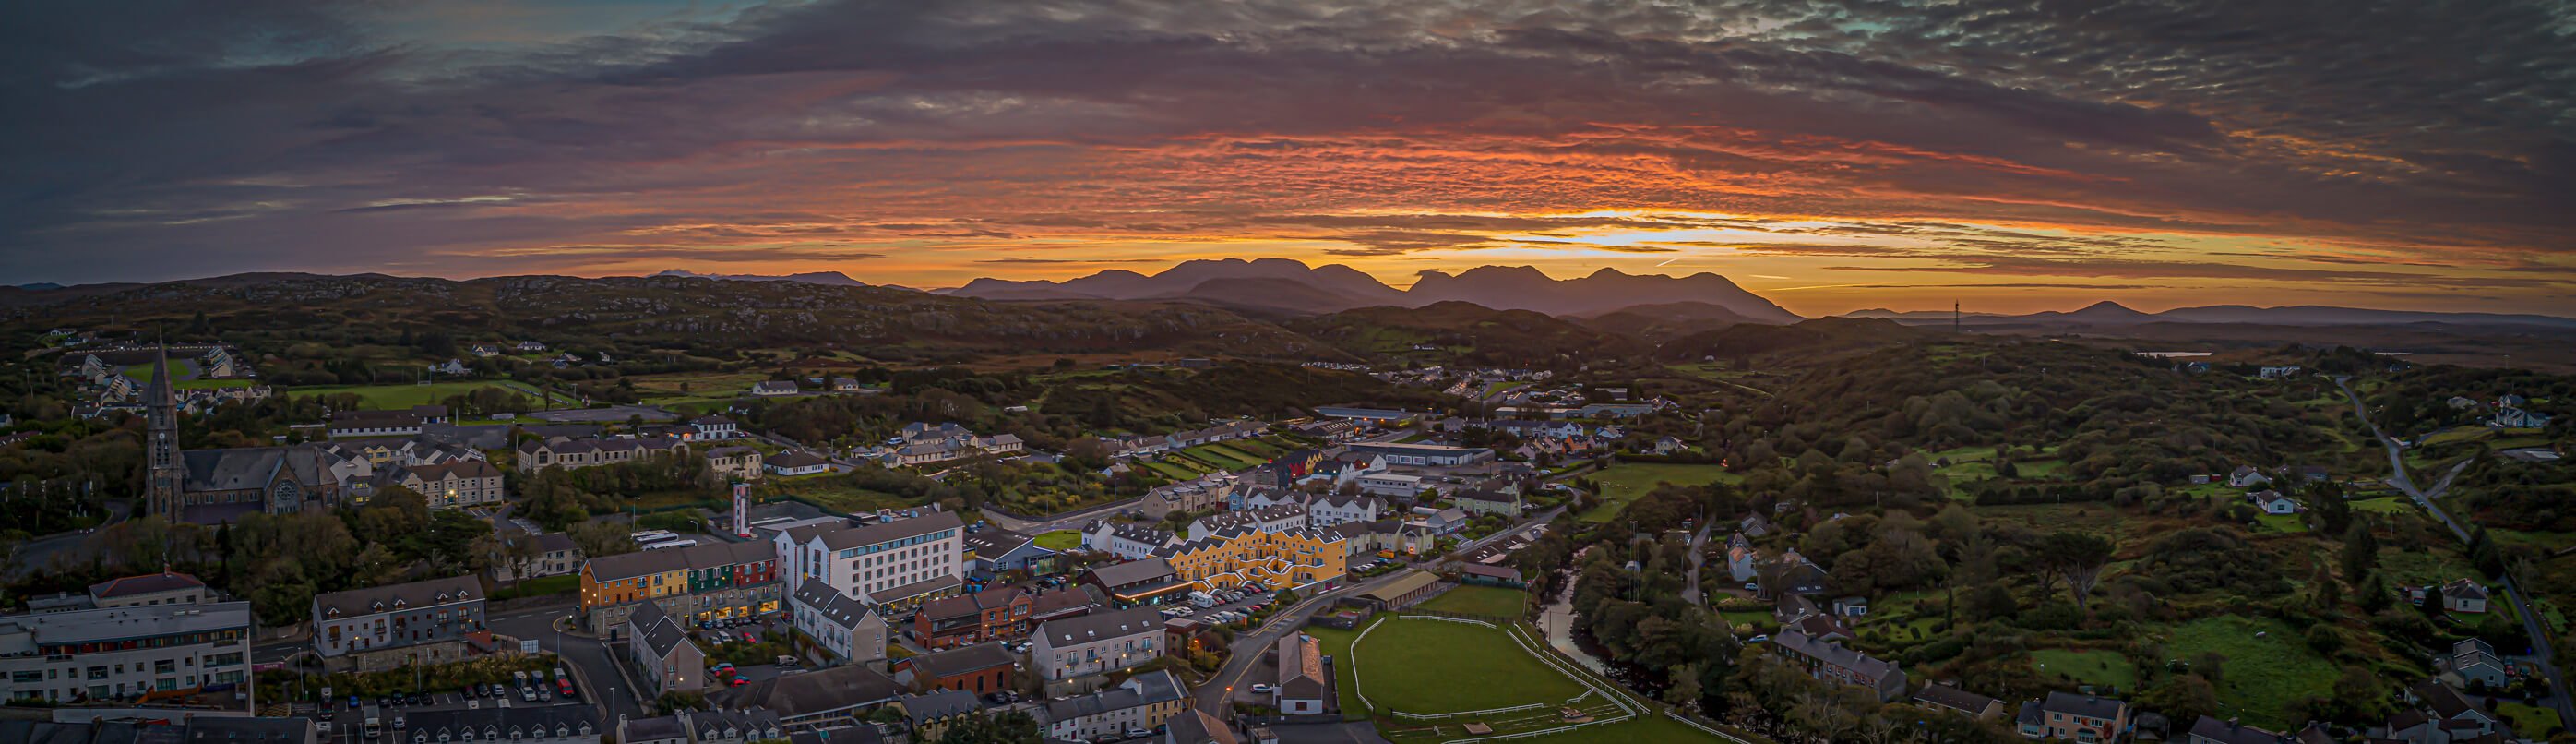 Spectacular aerial drone shot of sunrise over Clifden in Ireland